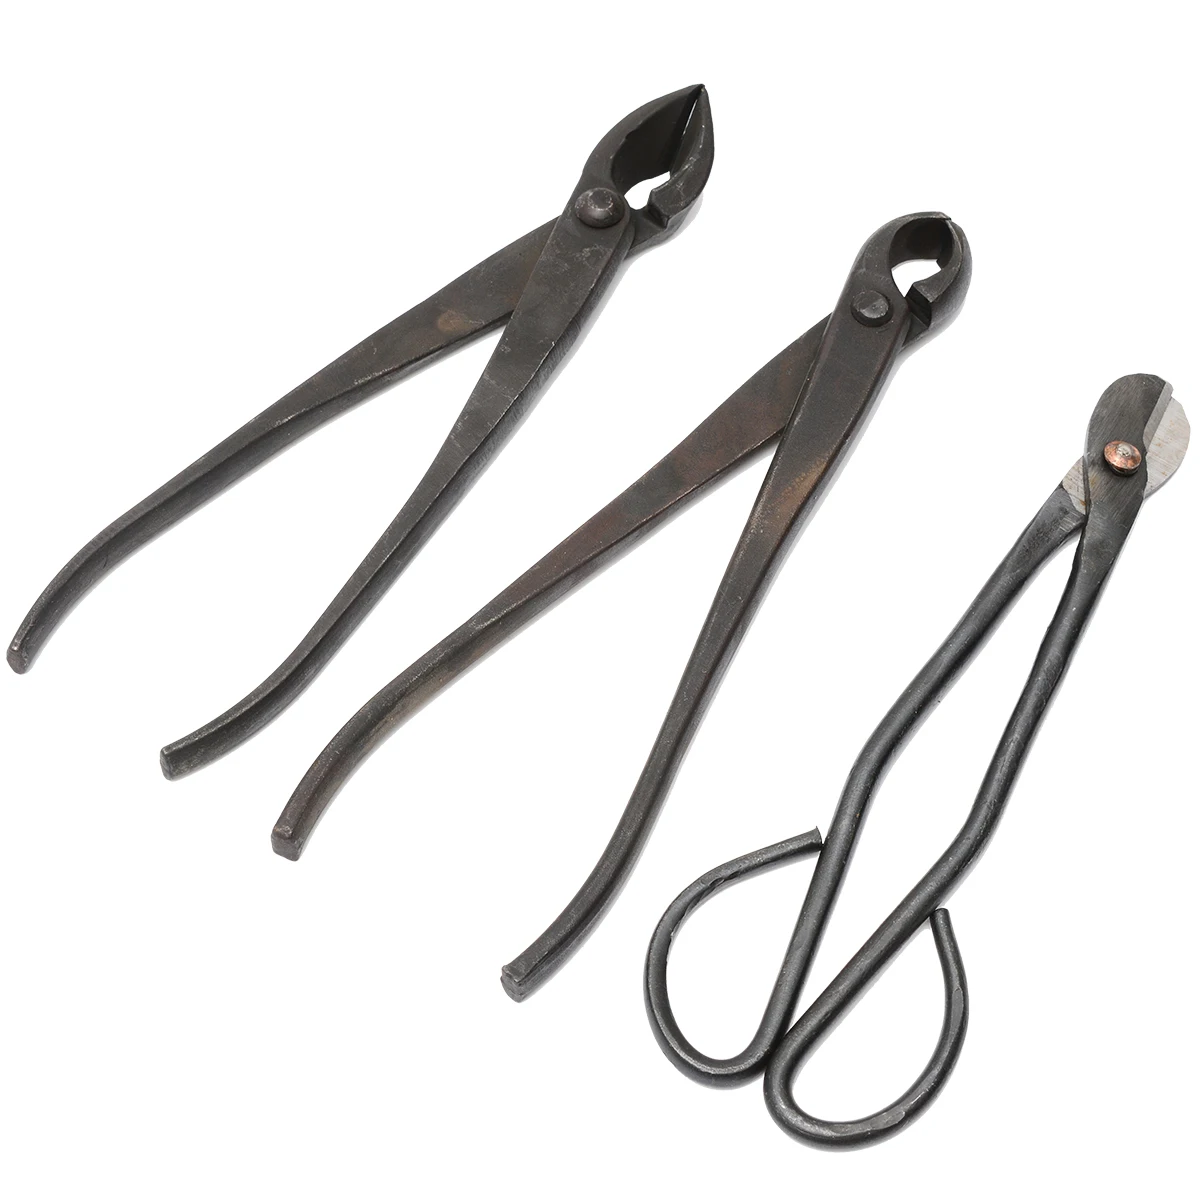 15Pcs Equipped Scissors Bonsai Tool Set Useful Carbon Steel Extensive Cutter Kit With Protect Case Garden Pruning Tools